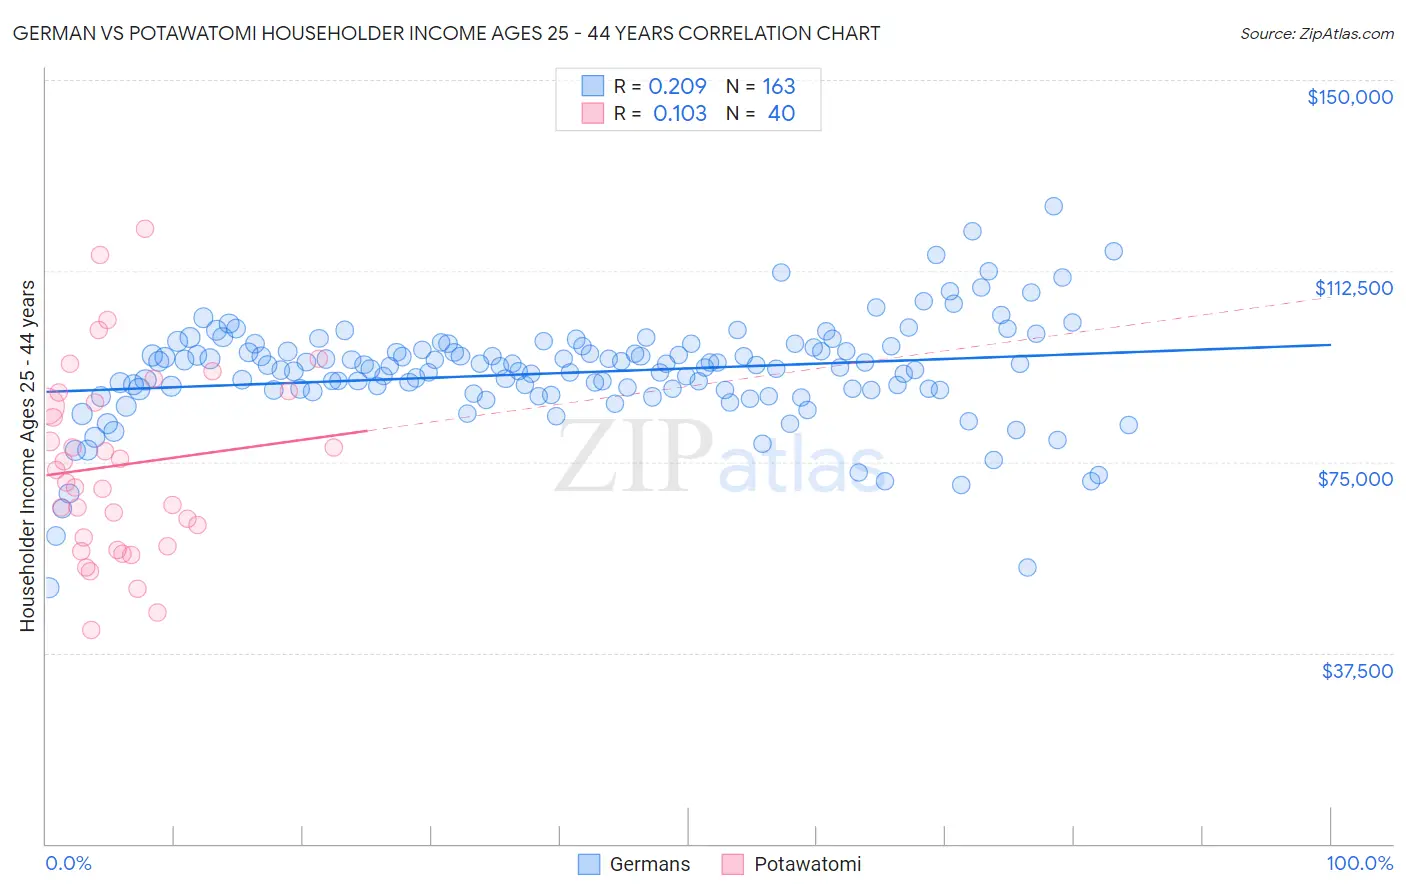 German vs Potawatomi Householder Income Ages 25 - 44 years